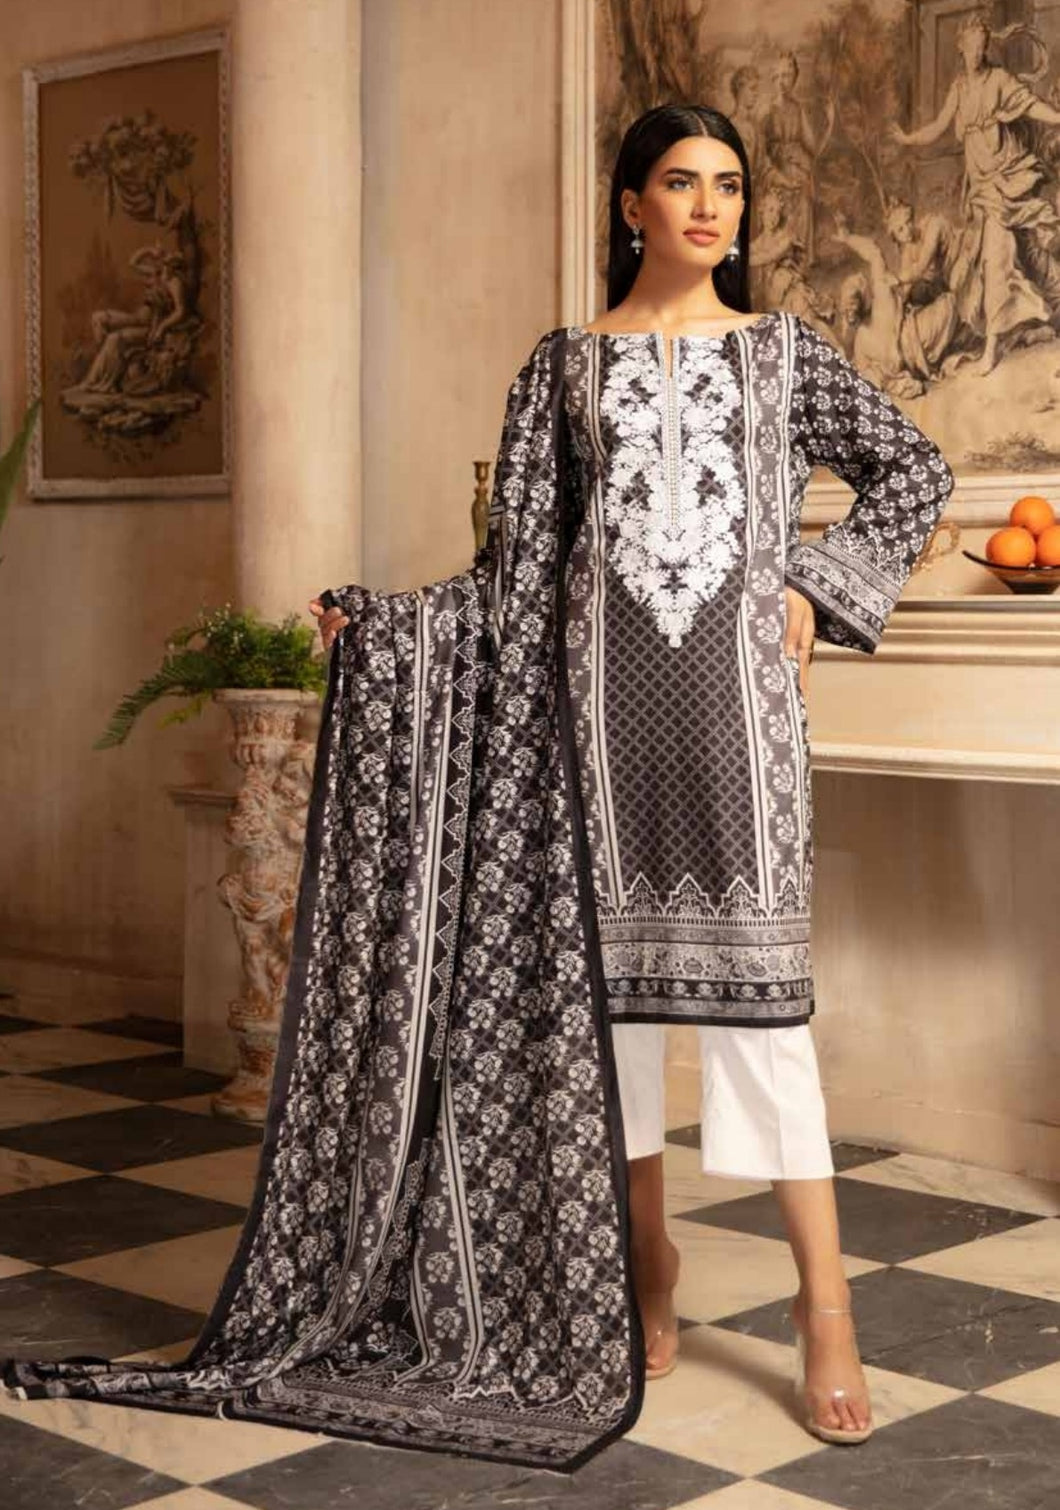 Yashal 3pc Unstitched Special Black Embroidered Digital Printed Lawn Suiting